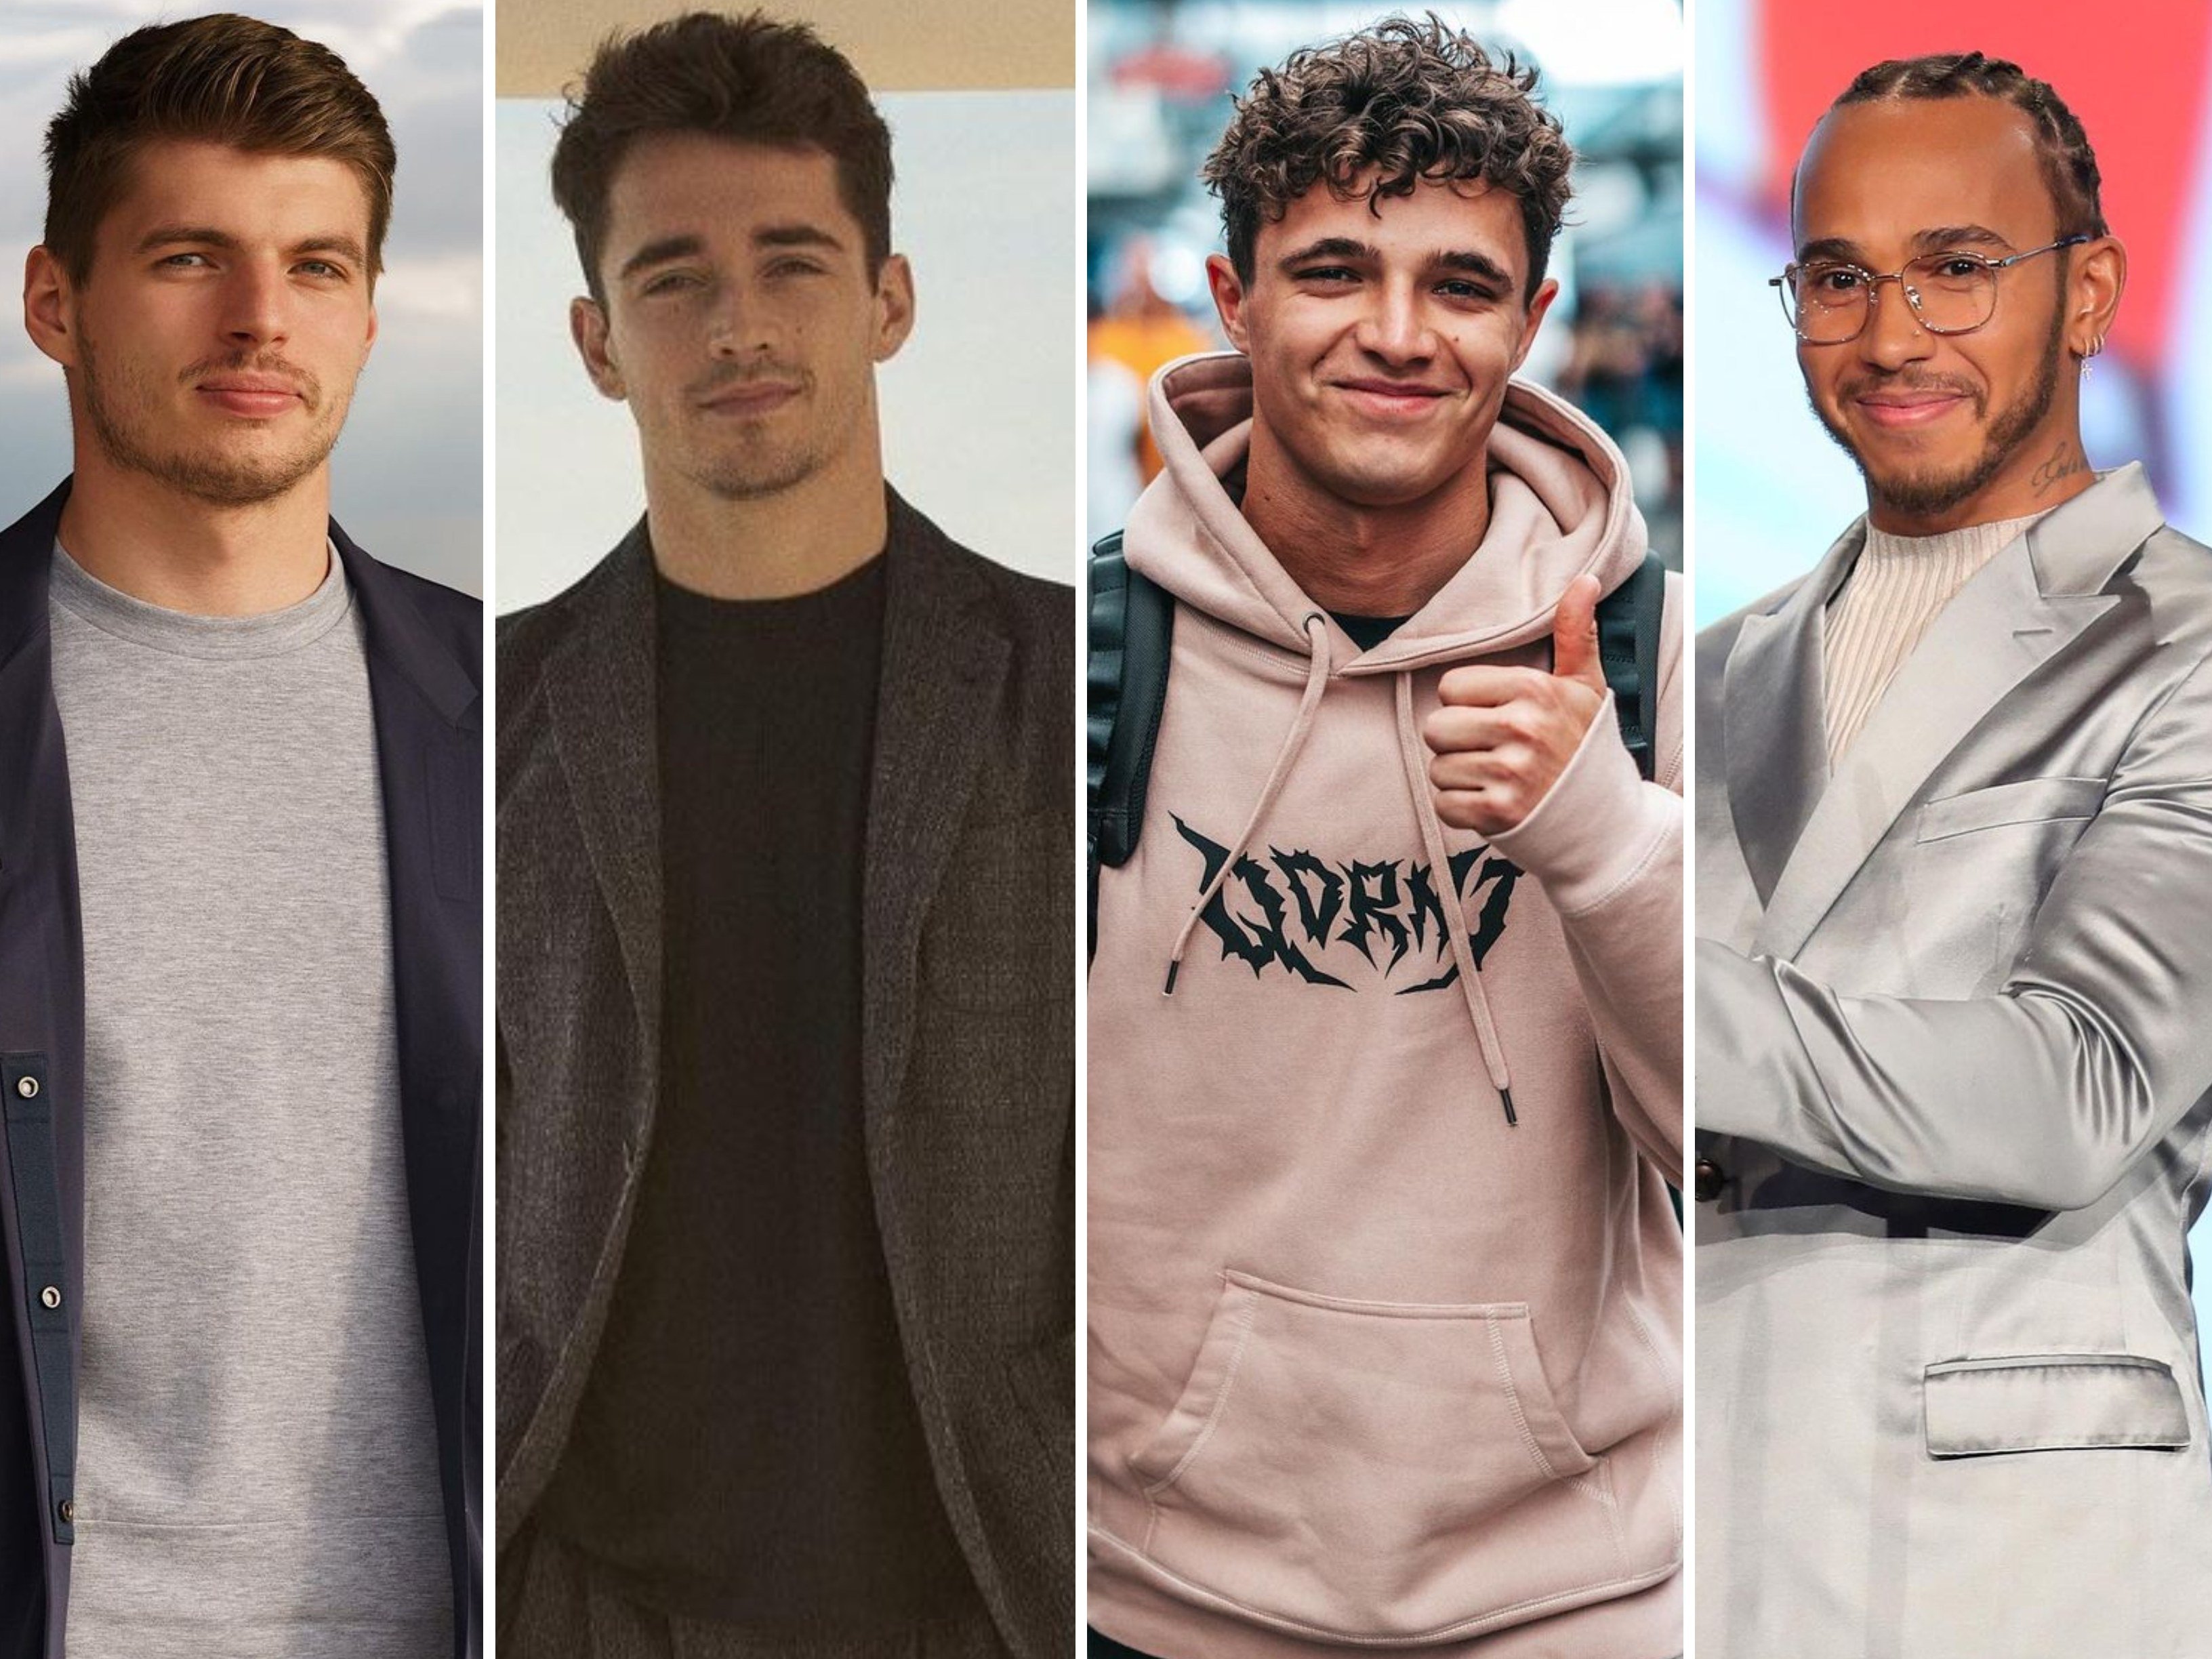 F1’s biggest earners on Instagram include, from left, world champion Max Verstappen, Charles Leclerc, Lando Norris and Lewis Hamilton. Photos: @charles_leclerc, @maxverstappen1, @landonorris, @lewishamilton/Instagram